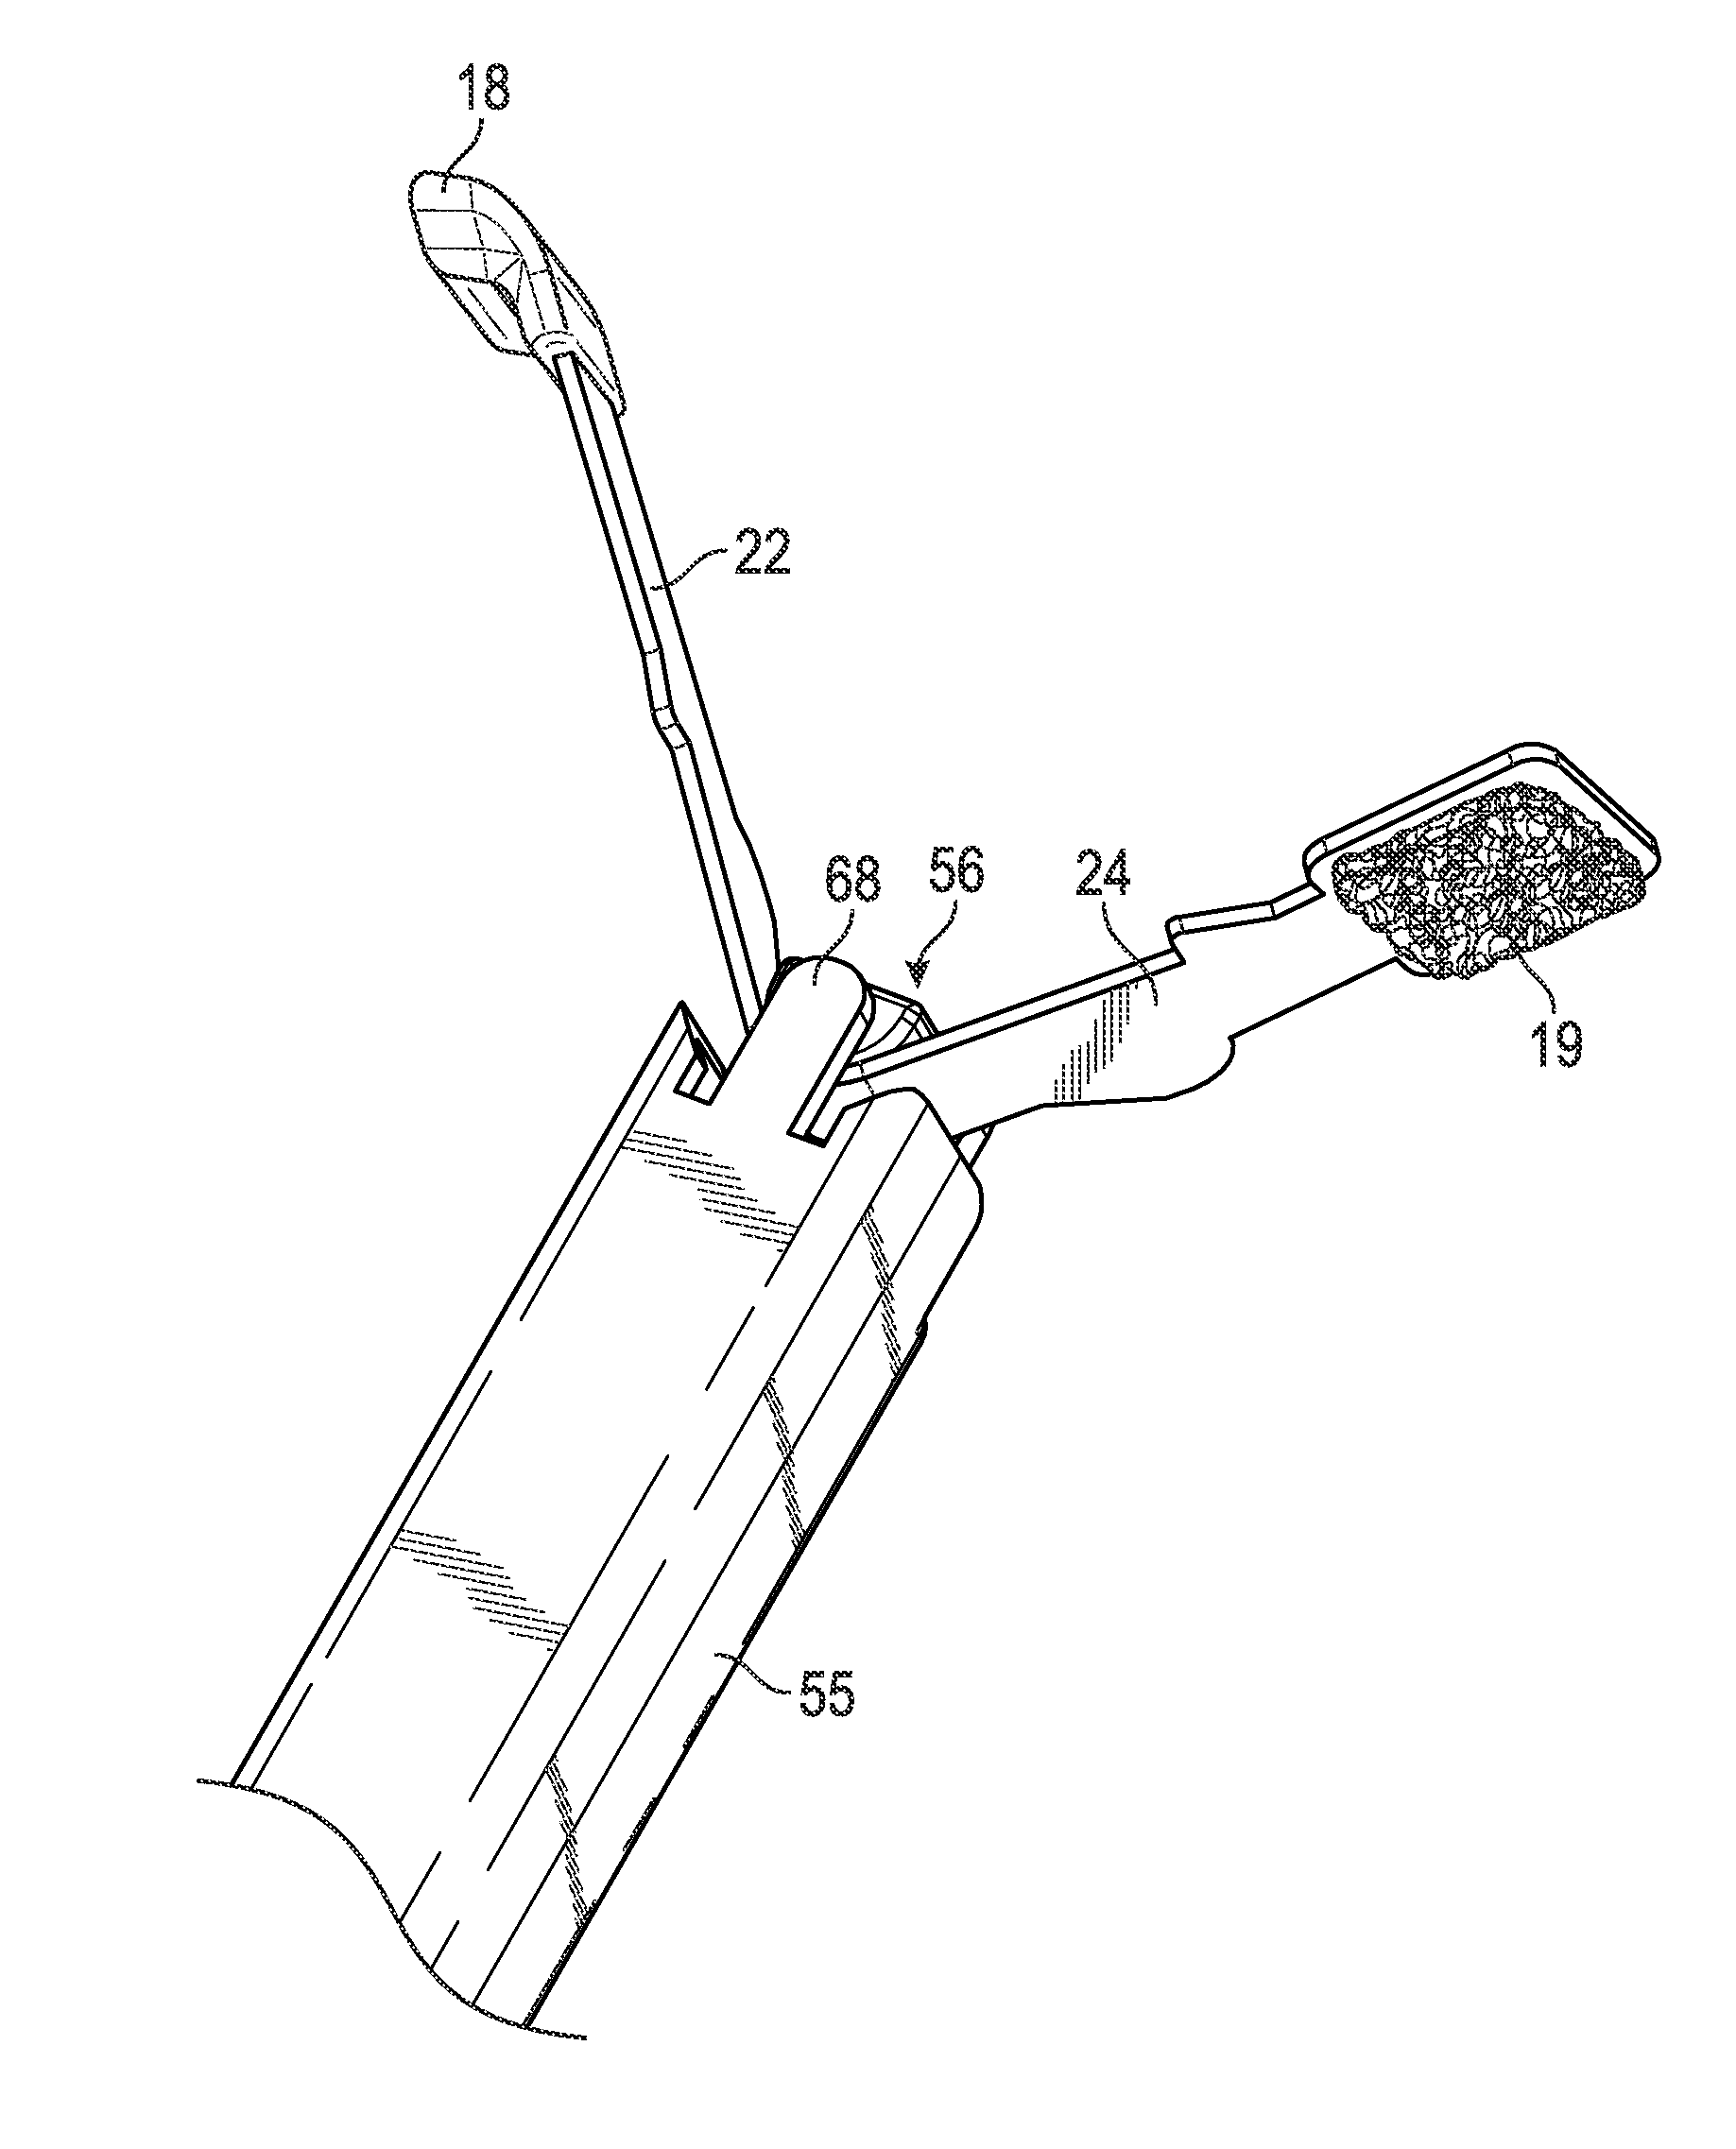 Insertion tool and insertion method for arterial tamponade device